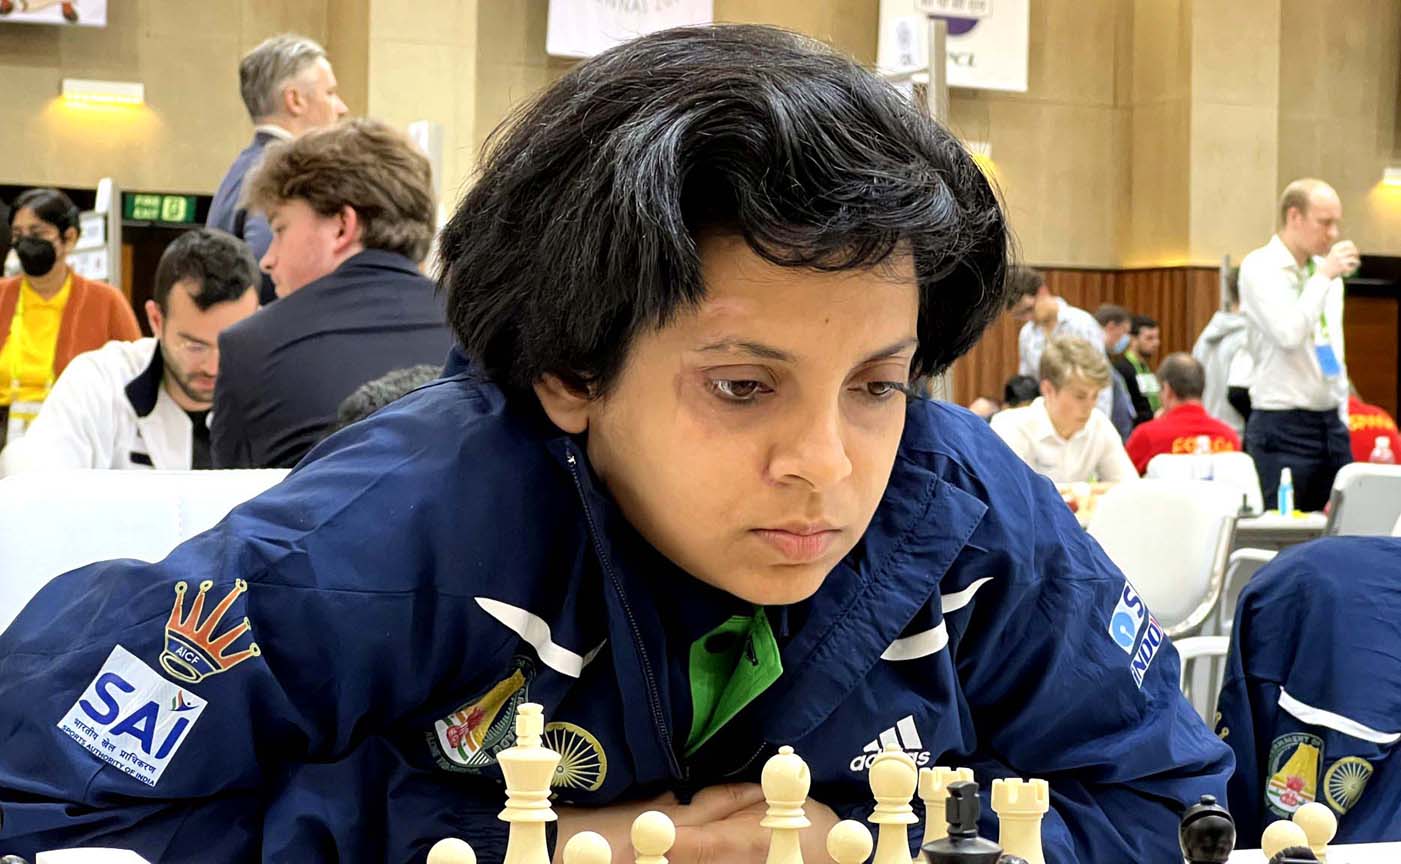 Odisha IM Padmini Rout represents India 2 Women Team at the Chess Olympiad in Chennai on 8 August 2022. (Photo Courtesey: ChaseBase India).